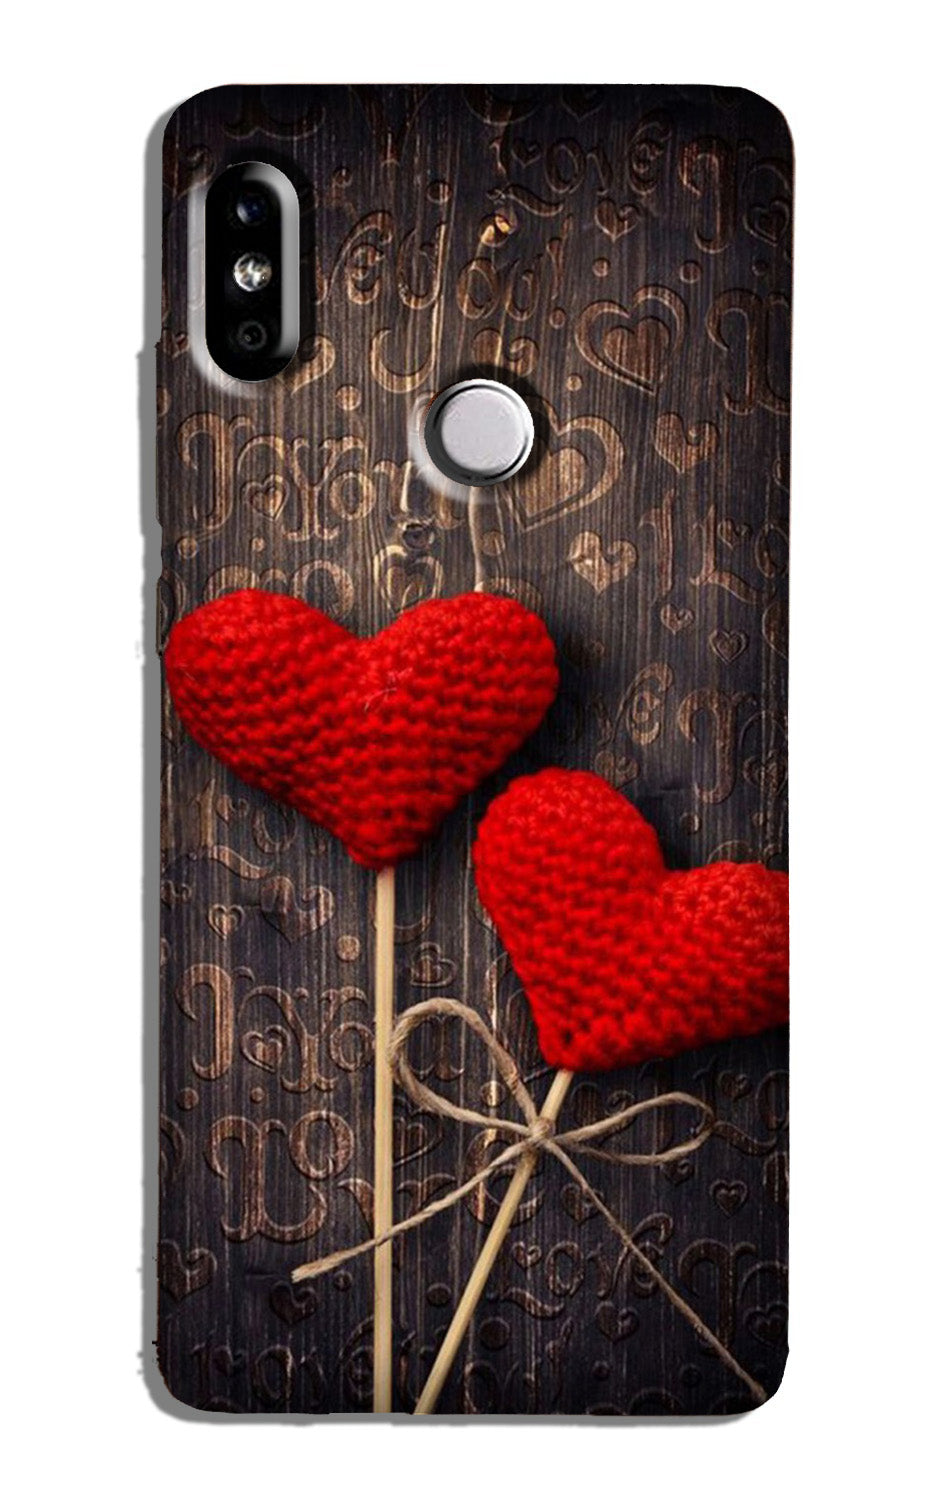 Red Hearts Case for Redmi Note 6 Pro